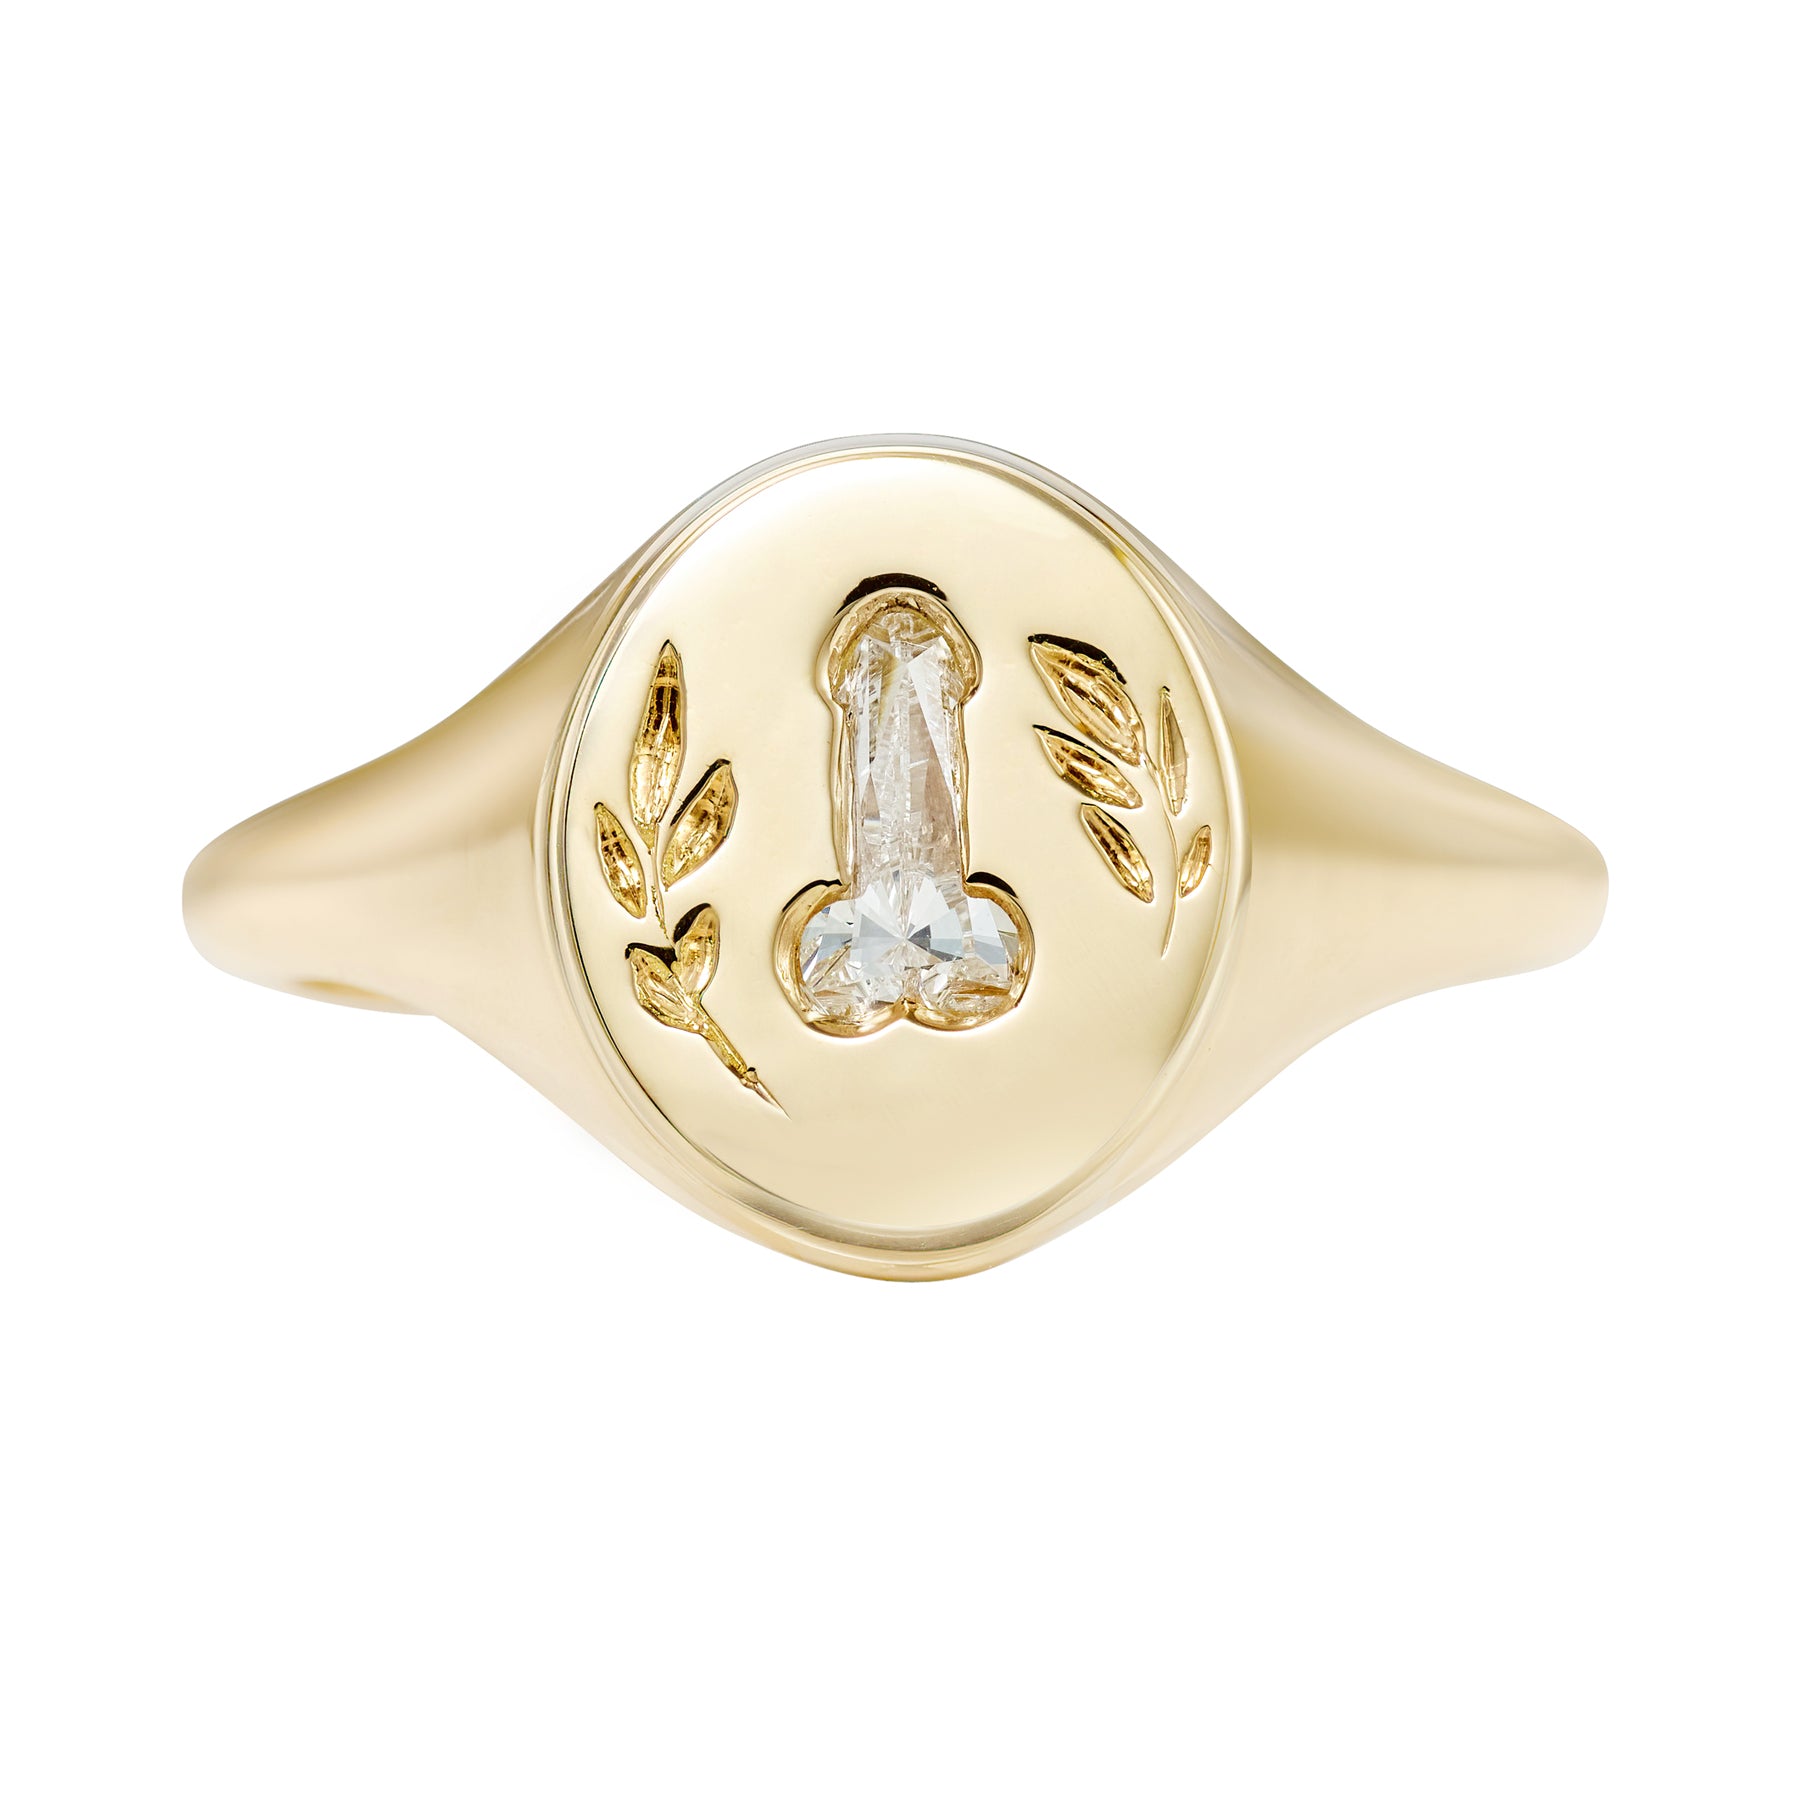 Statement Signet Ring with A F.U. Diamond and Hand Engraving ~0.3 SI1 D-J